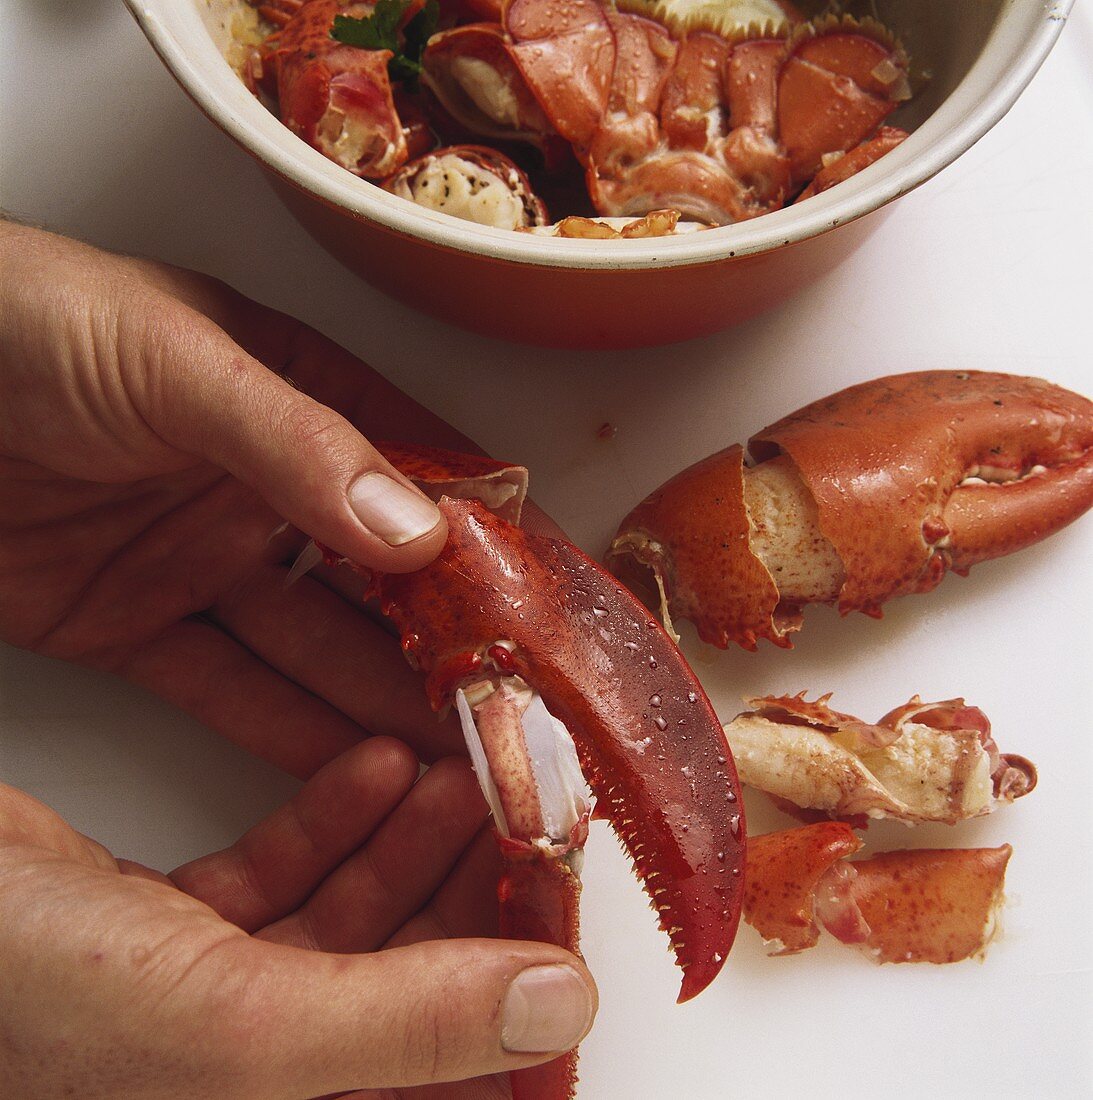 Taking the meat out of a lobster claw